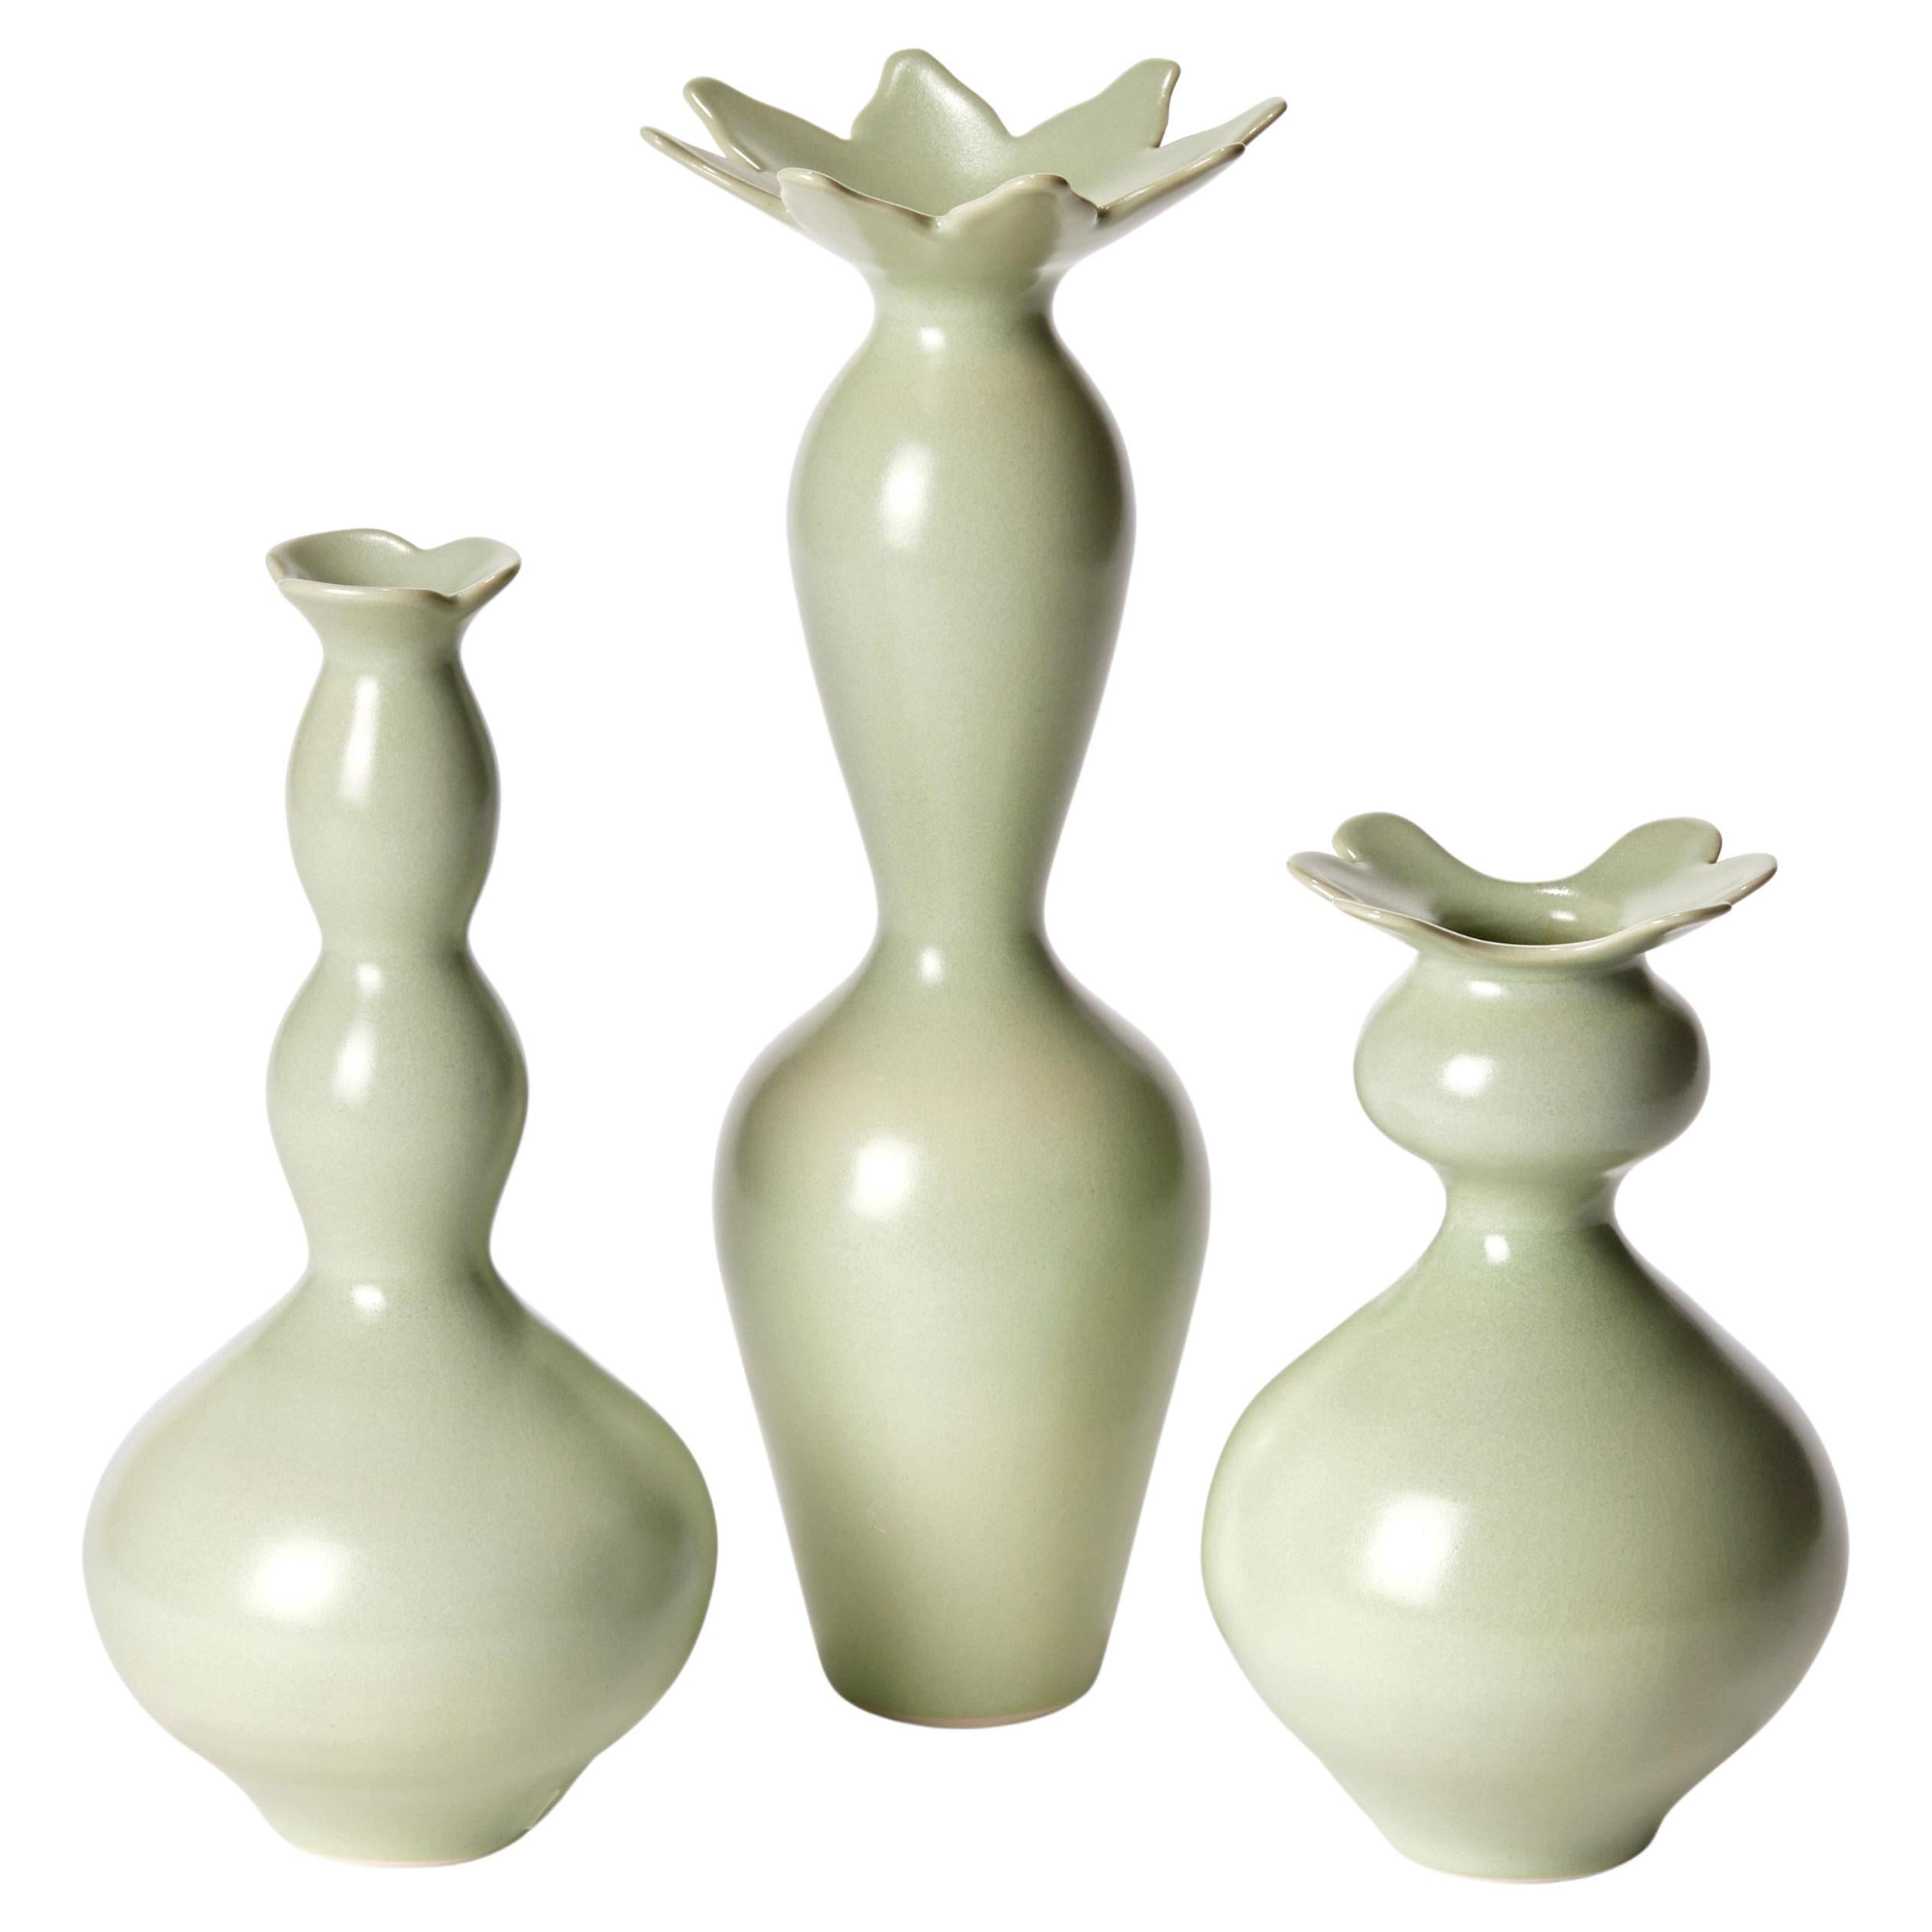 Cactus Trio, still life of three green thrown porcelain vases by Vivienne Foley For Sale